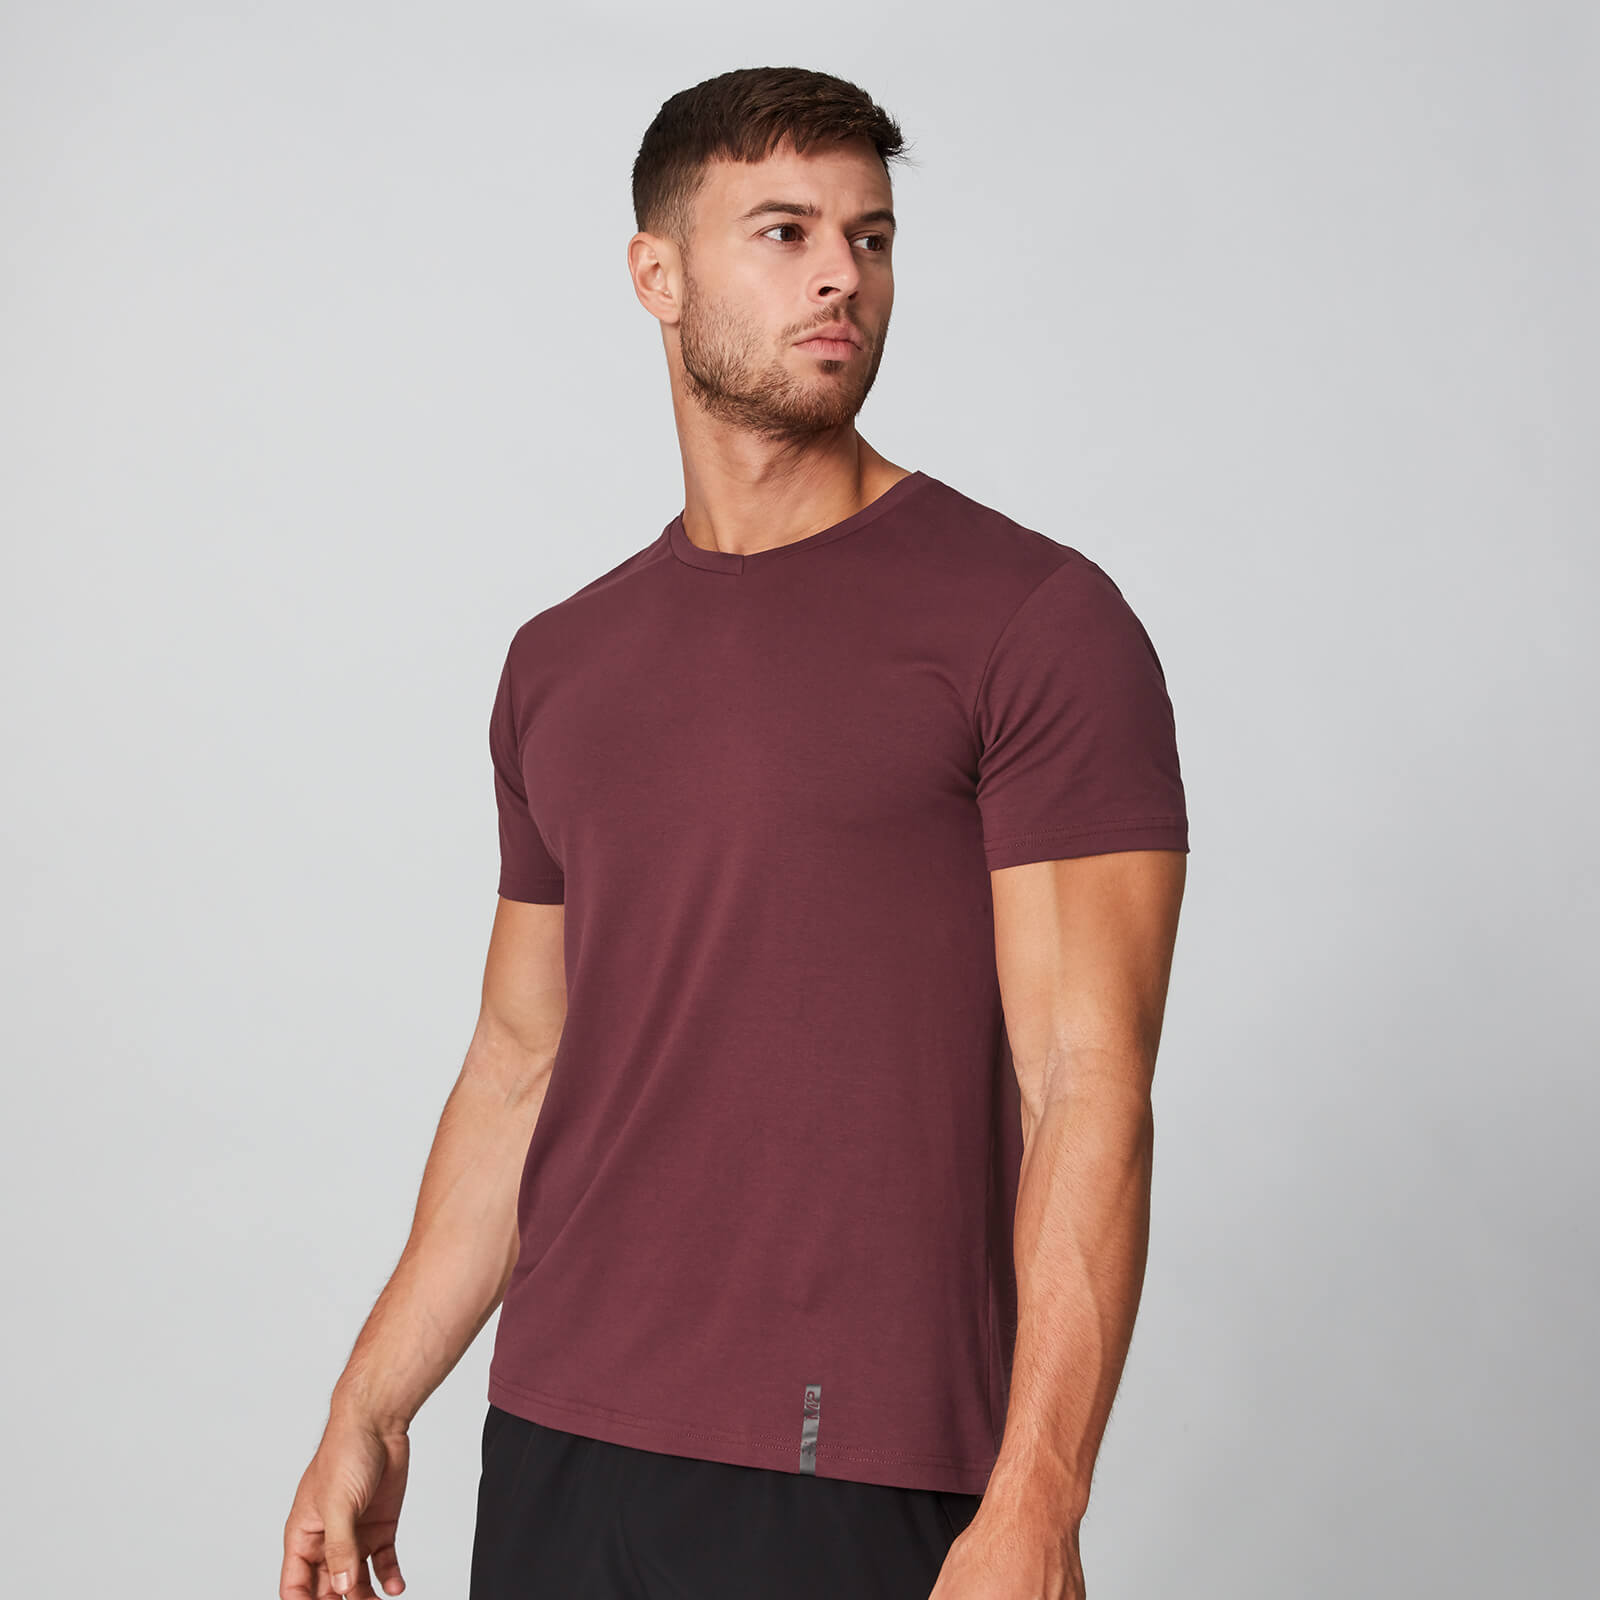 Myprotein Luxe Classic V-Neck - Oxblood